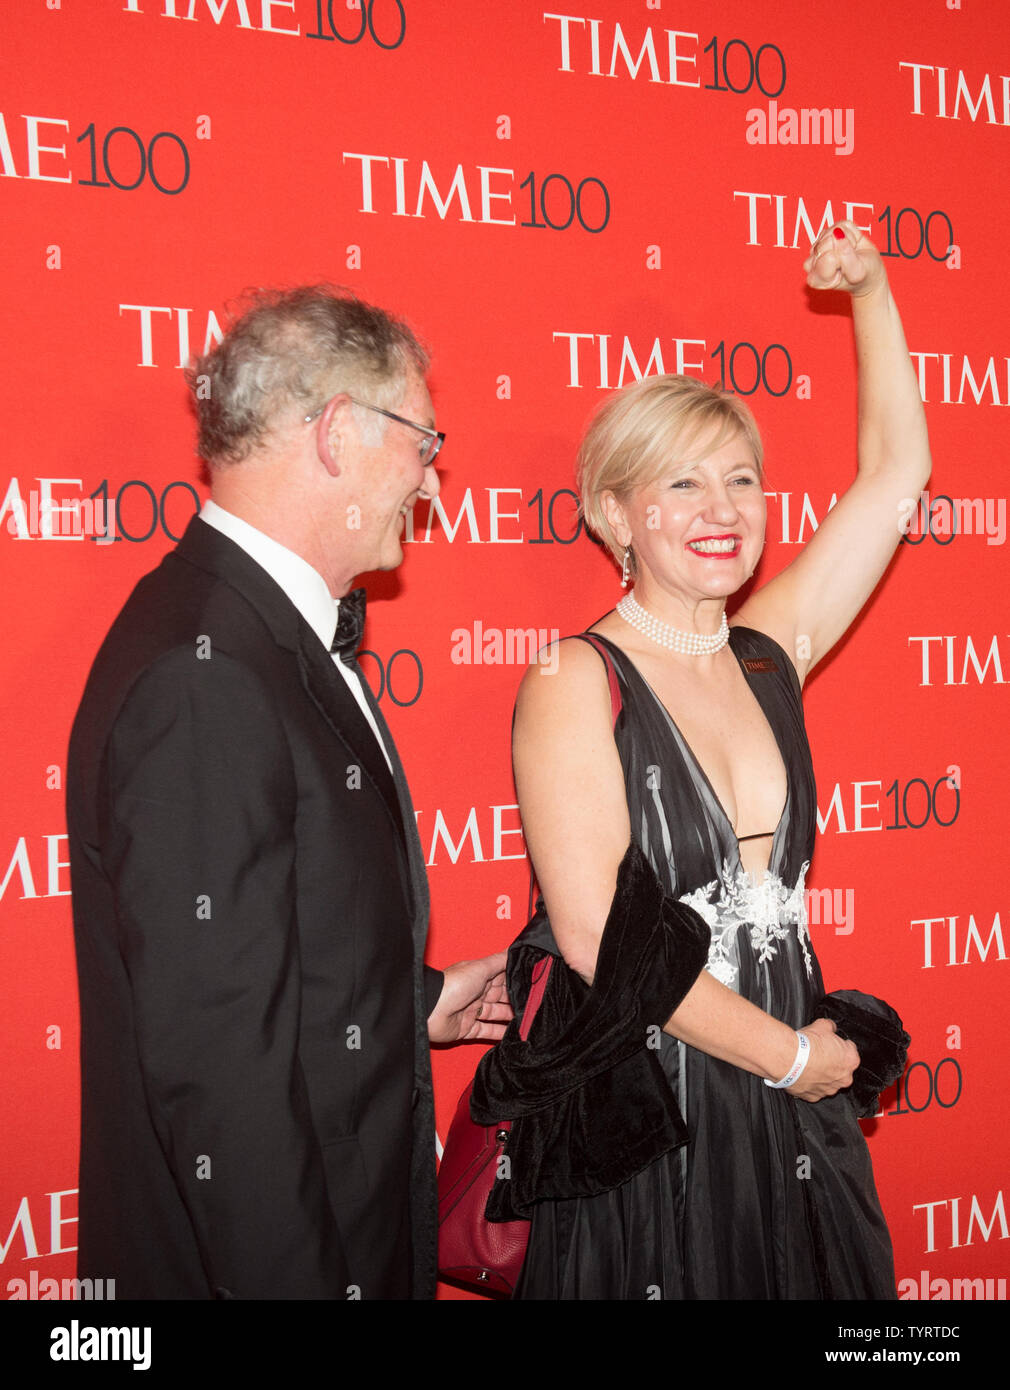 Glenda Gray, R arrives on the red carpet at the TIME 100 Gala at Frederick P. Rose Hall, Home of Jazz at Lincoln Center, in New York City on April 26, 2017. TIME 100 celebrates TIME Magazine's list of the 100 Most Influential People in the World.      Photo by Bryan R. Smith/UPI Stock Photo